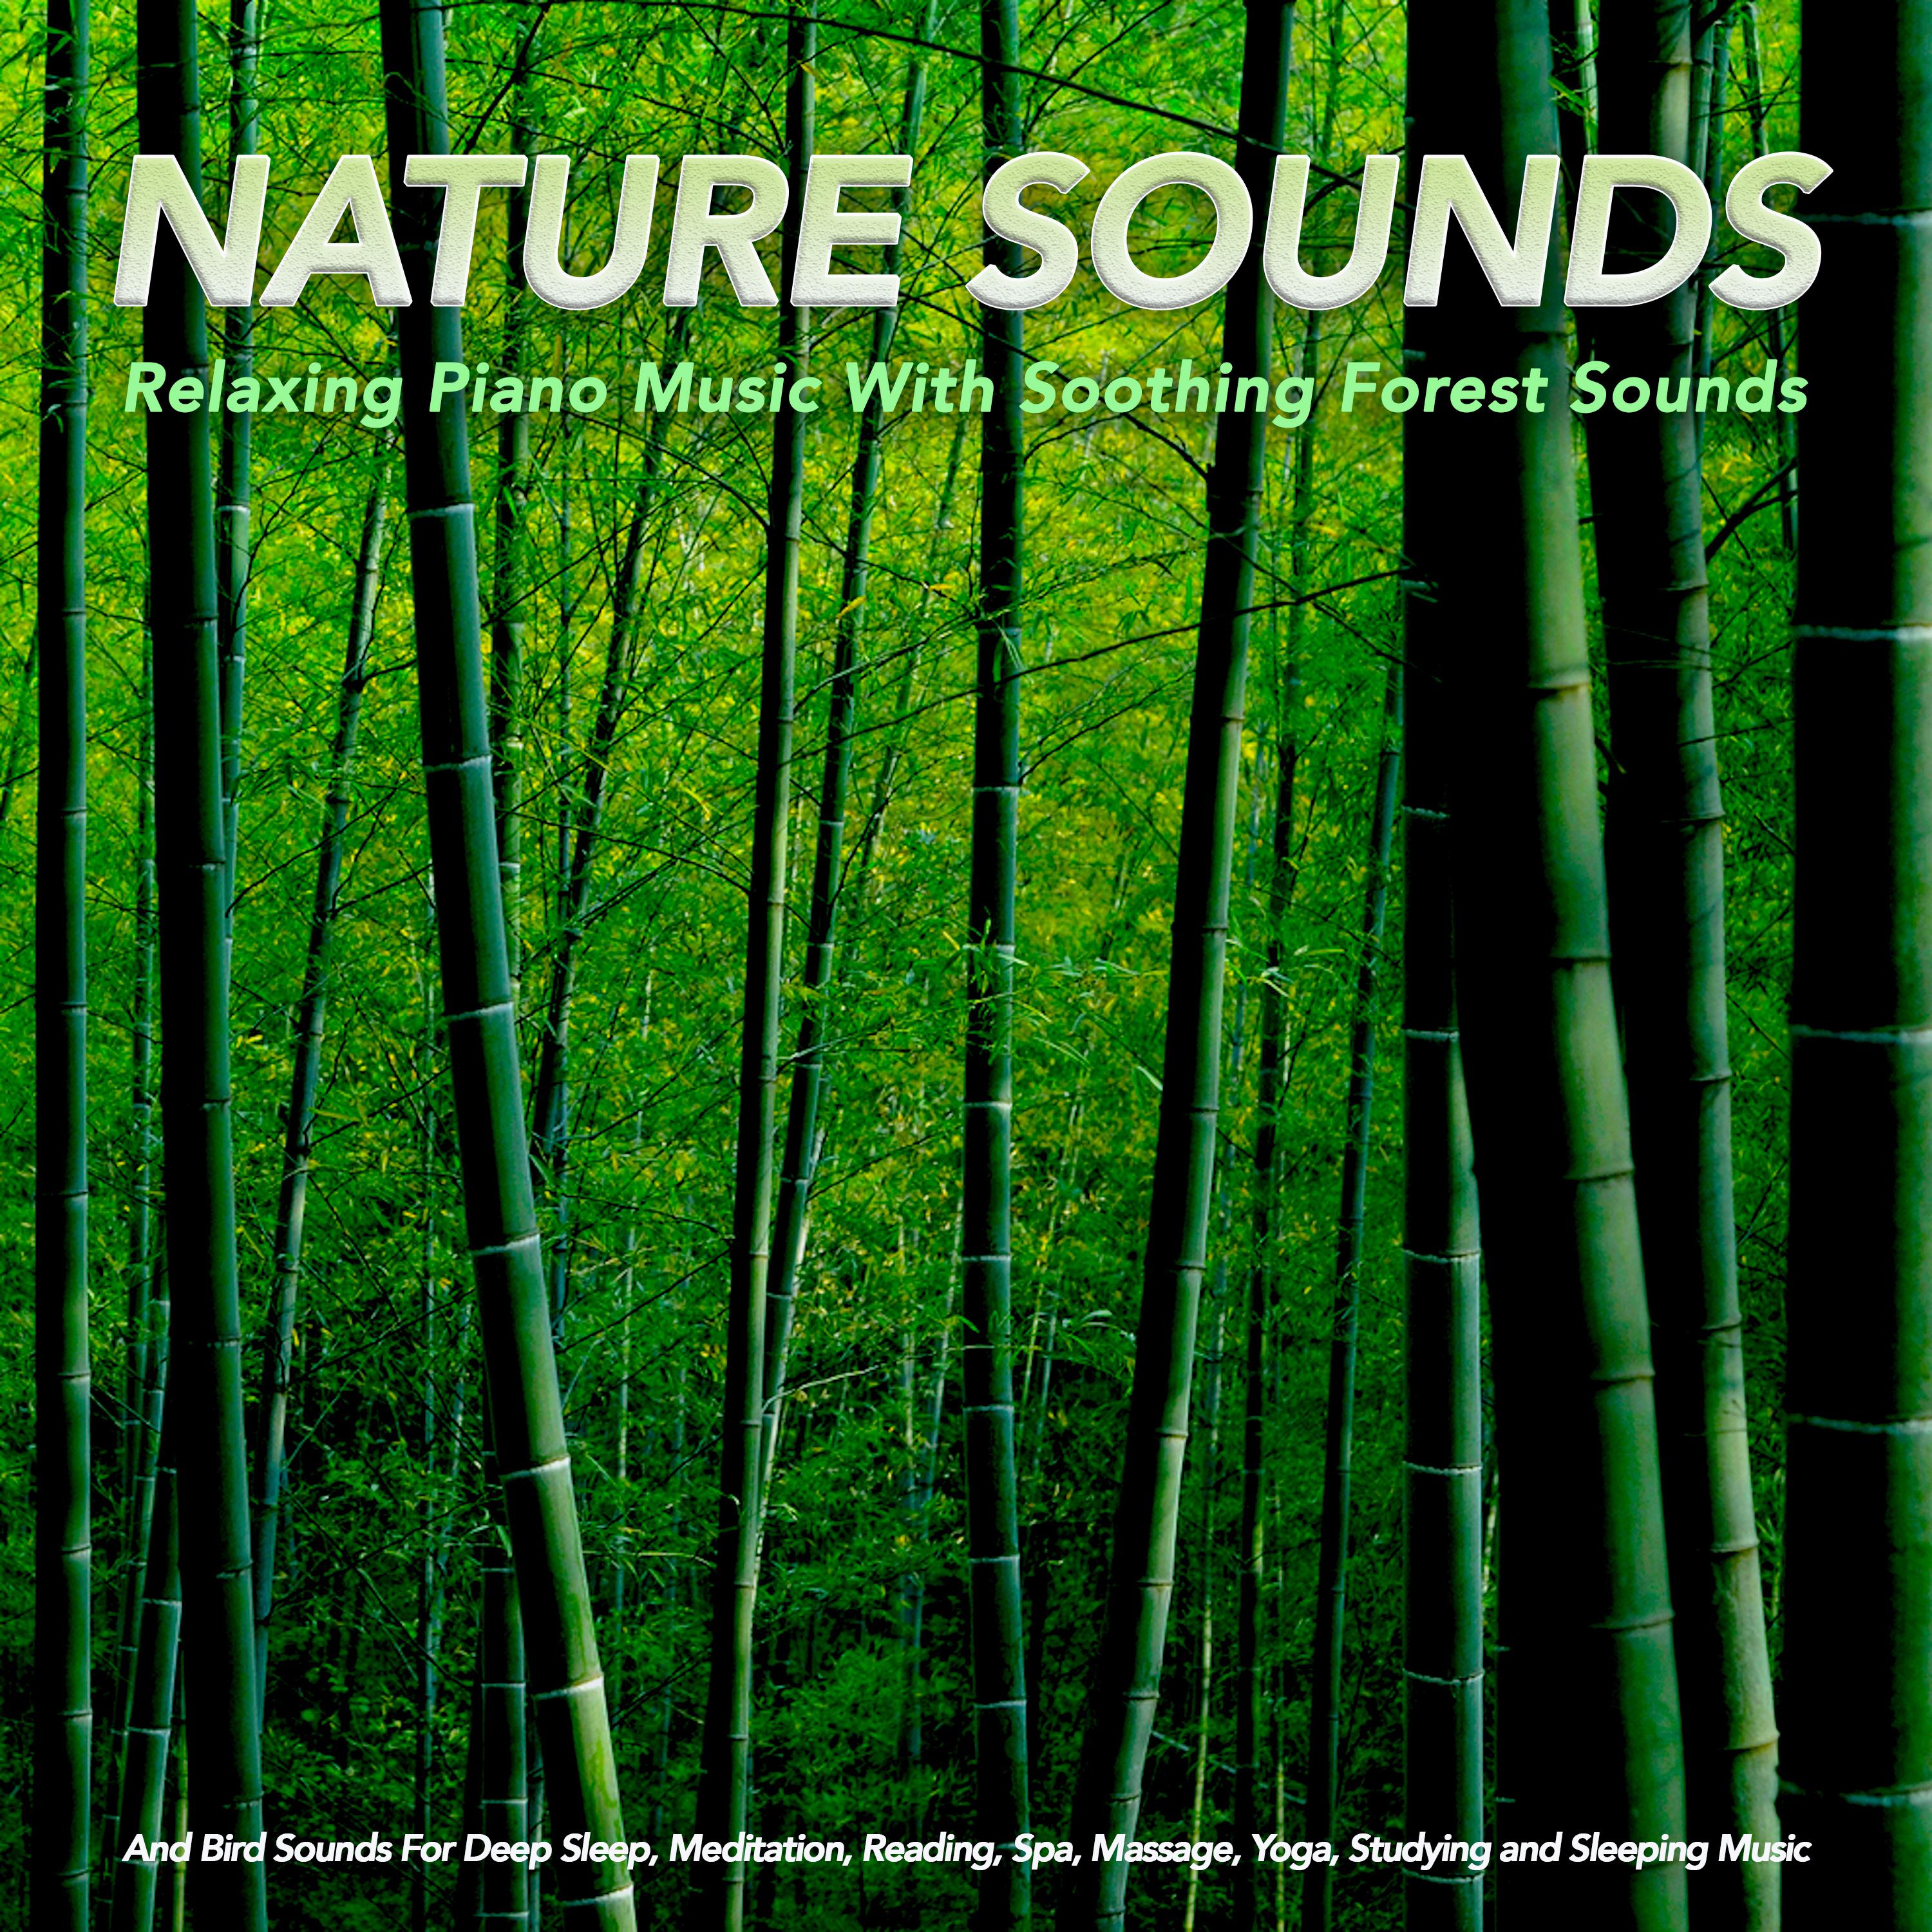 Music For Massage With Bird Sounds